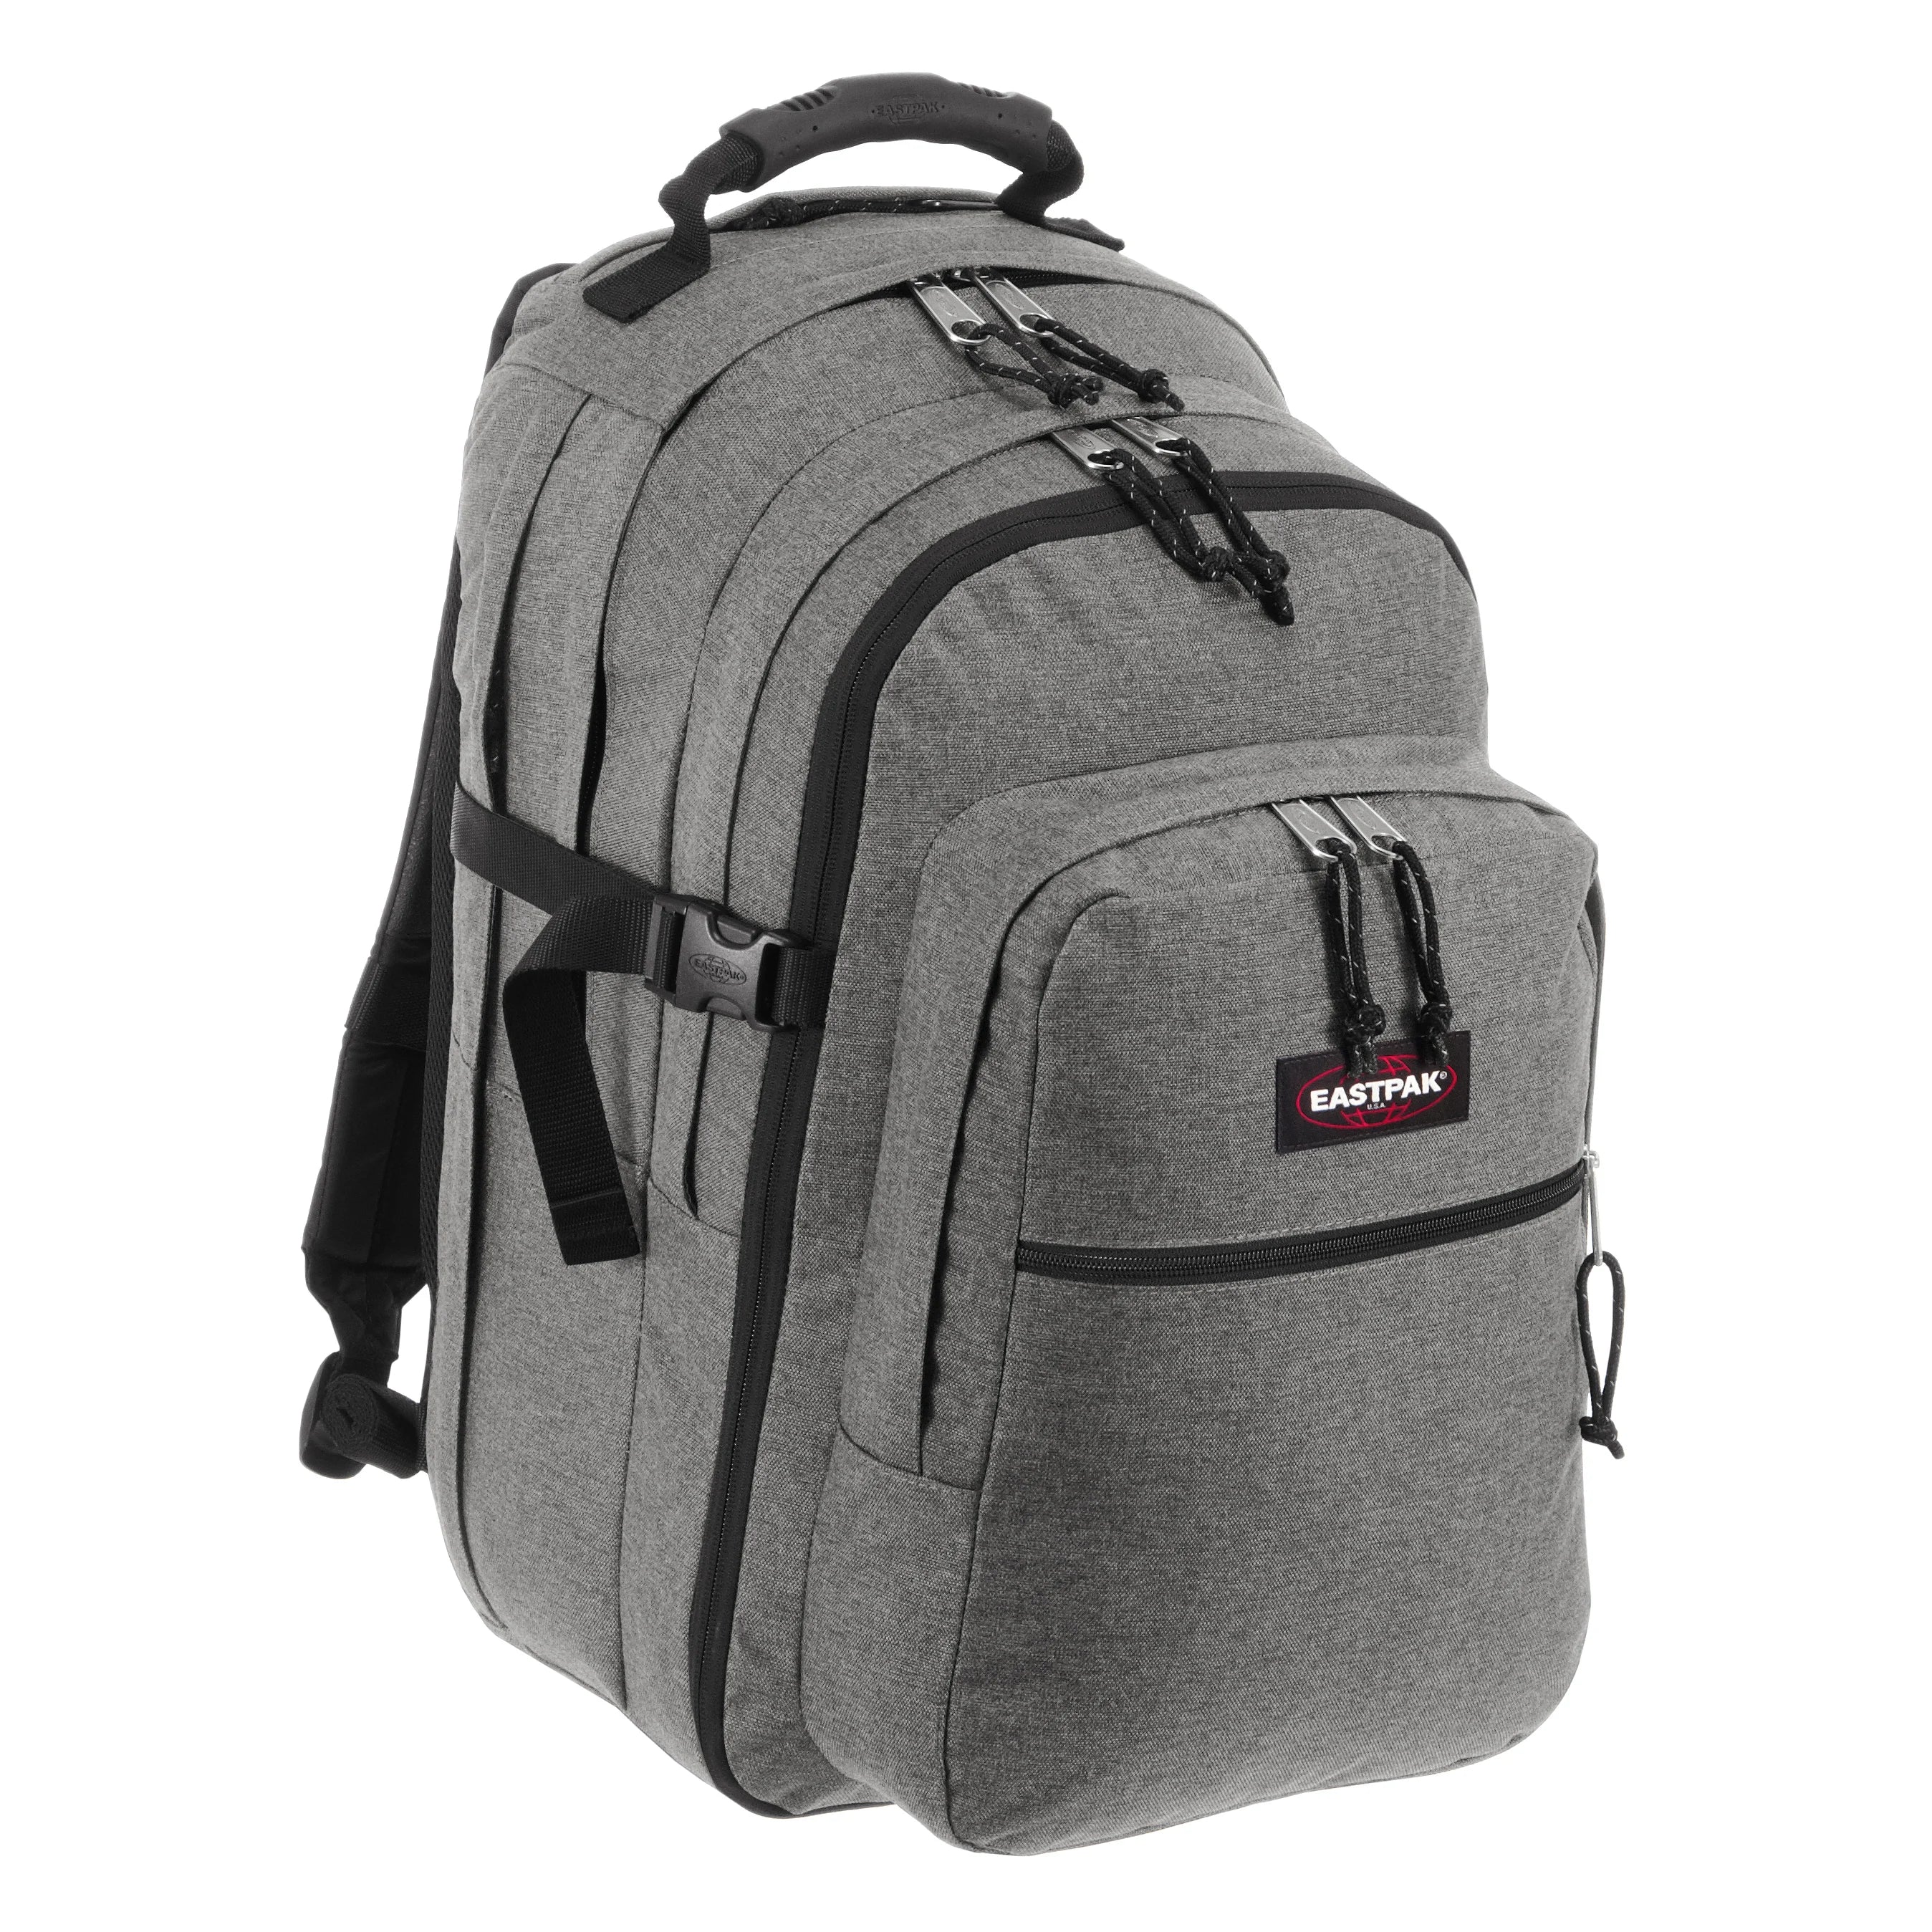 Eastpak Authentic Re-Check Tutor backpack with laptop compartment 48 cm - sunday gray